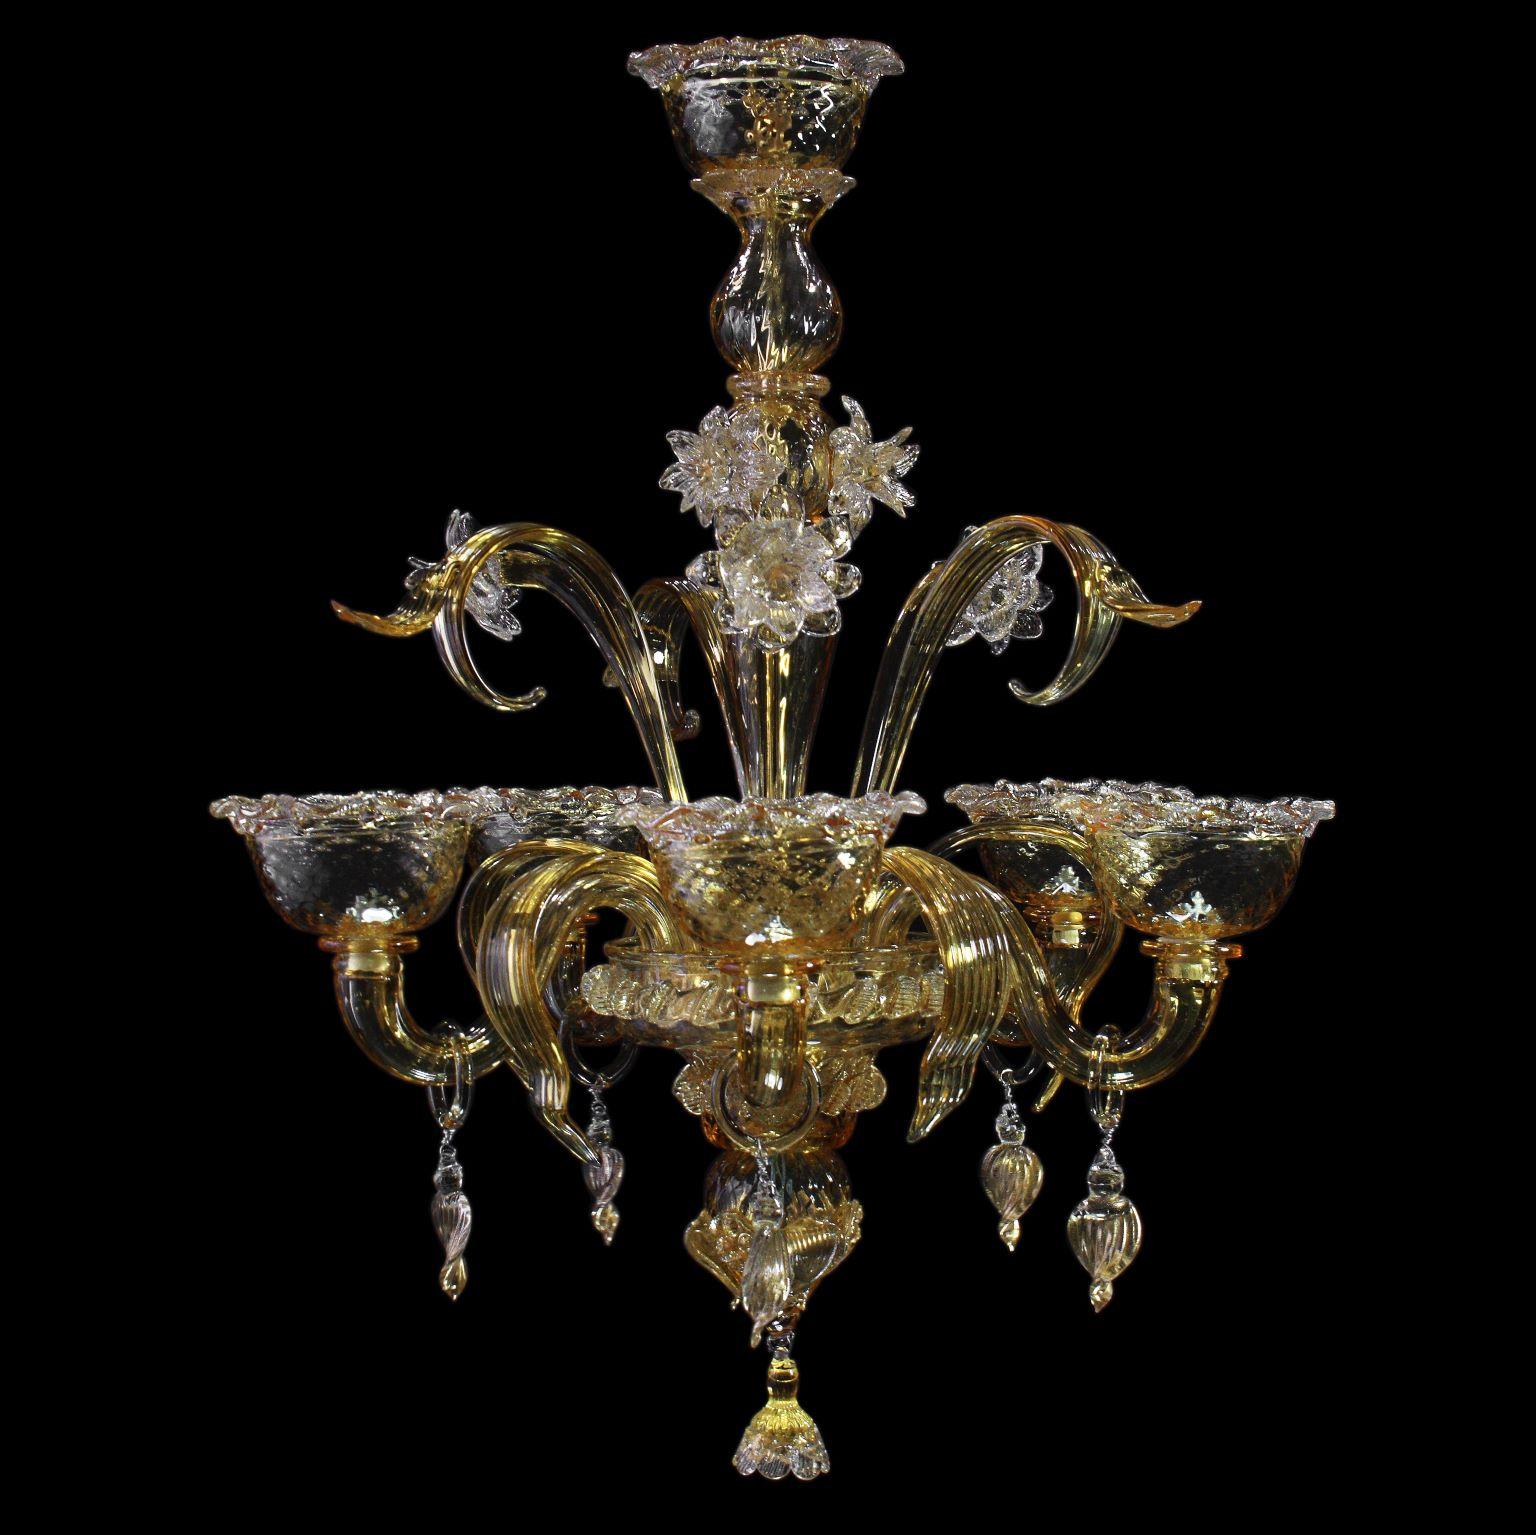 Contemporary Artistic Chandelier 5 Arms Amber Murano Glass, Gold Details by Multiforme For Sale